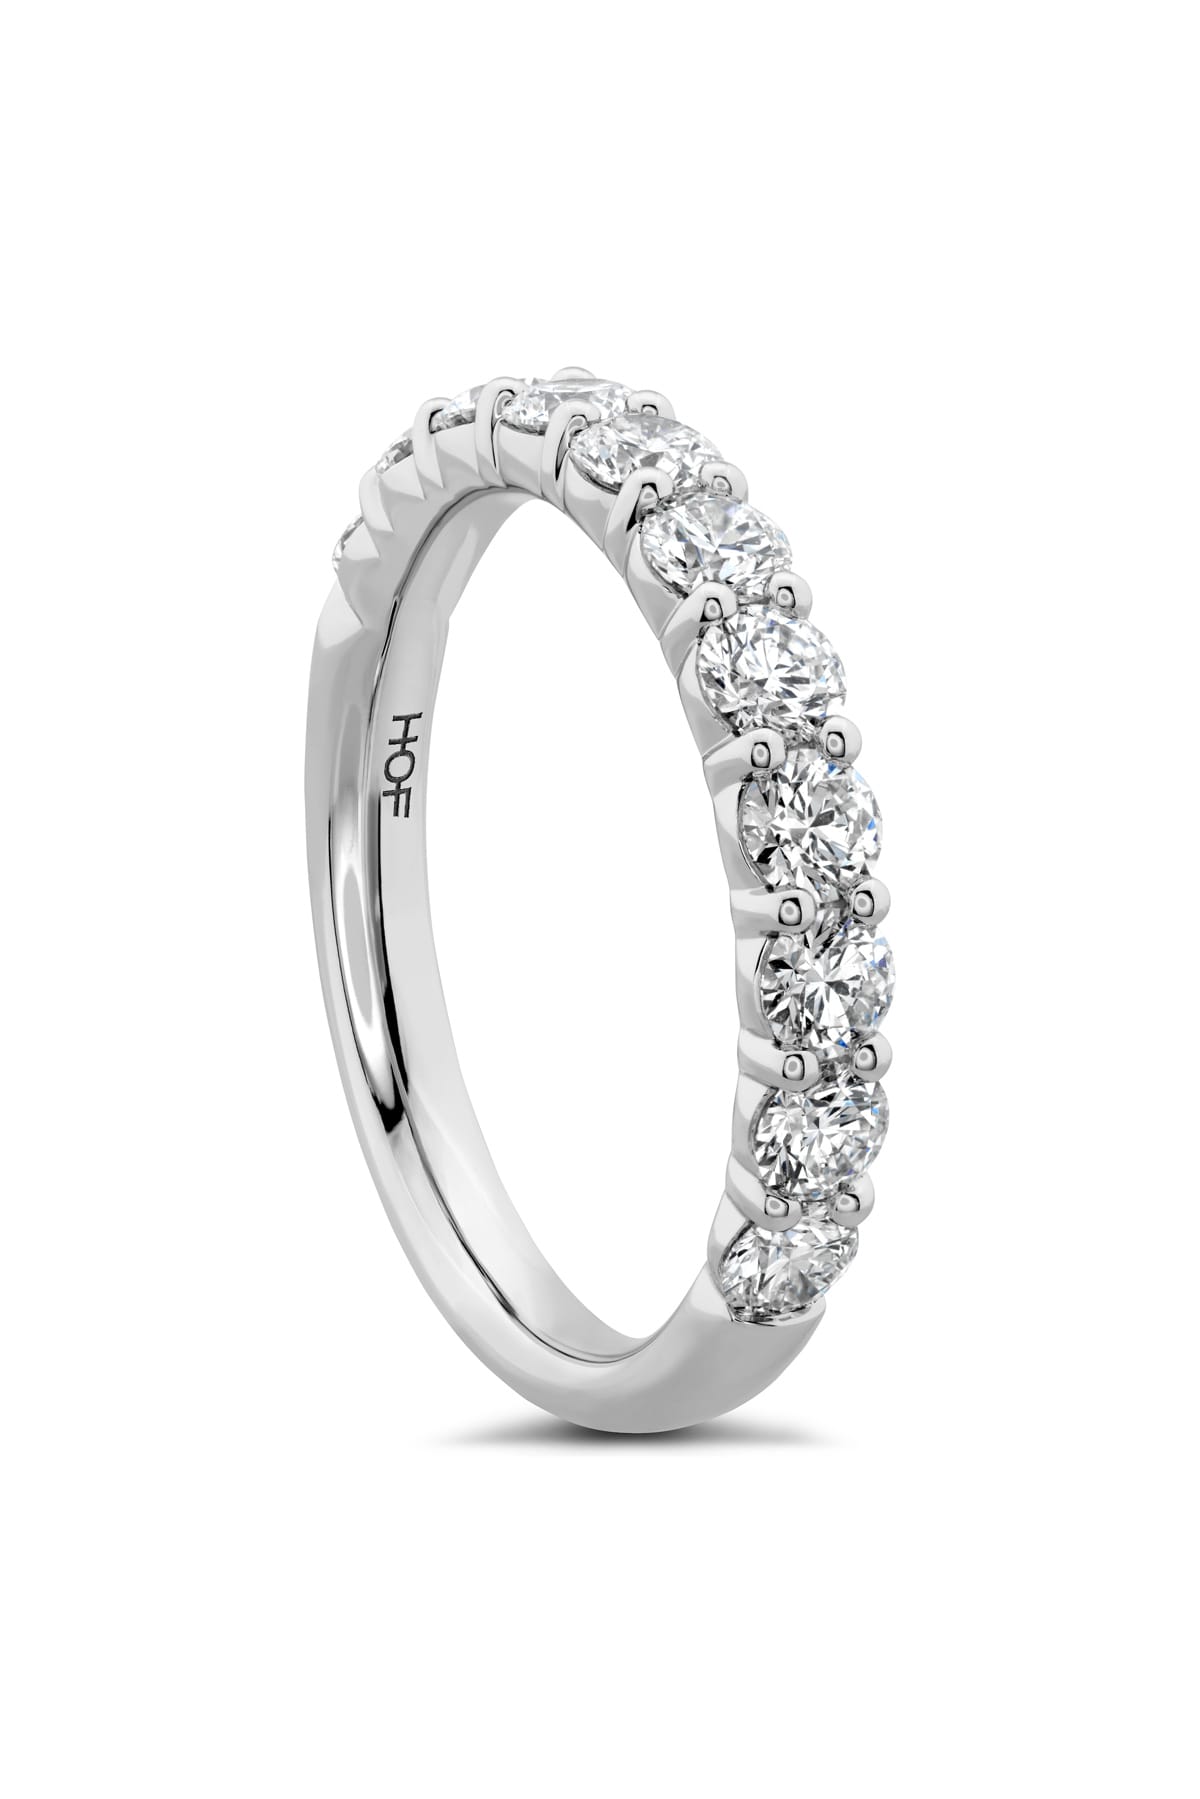 Signature 11 Stone Band From Hearts On Fire available at LeGassick Diamonds and Jewellery Gold Coast, Australia.